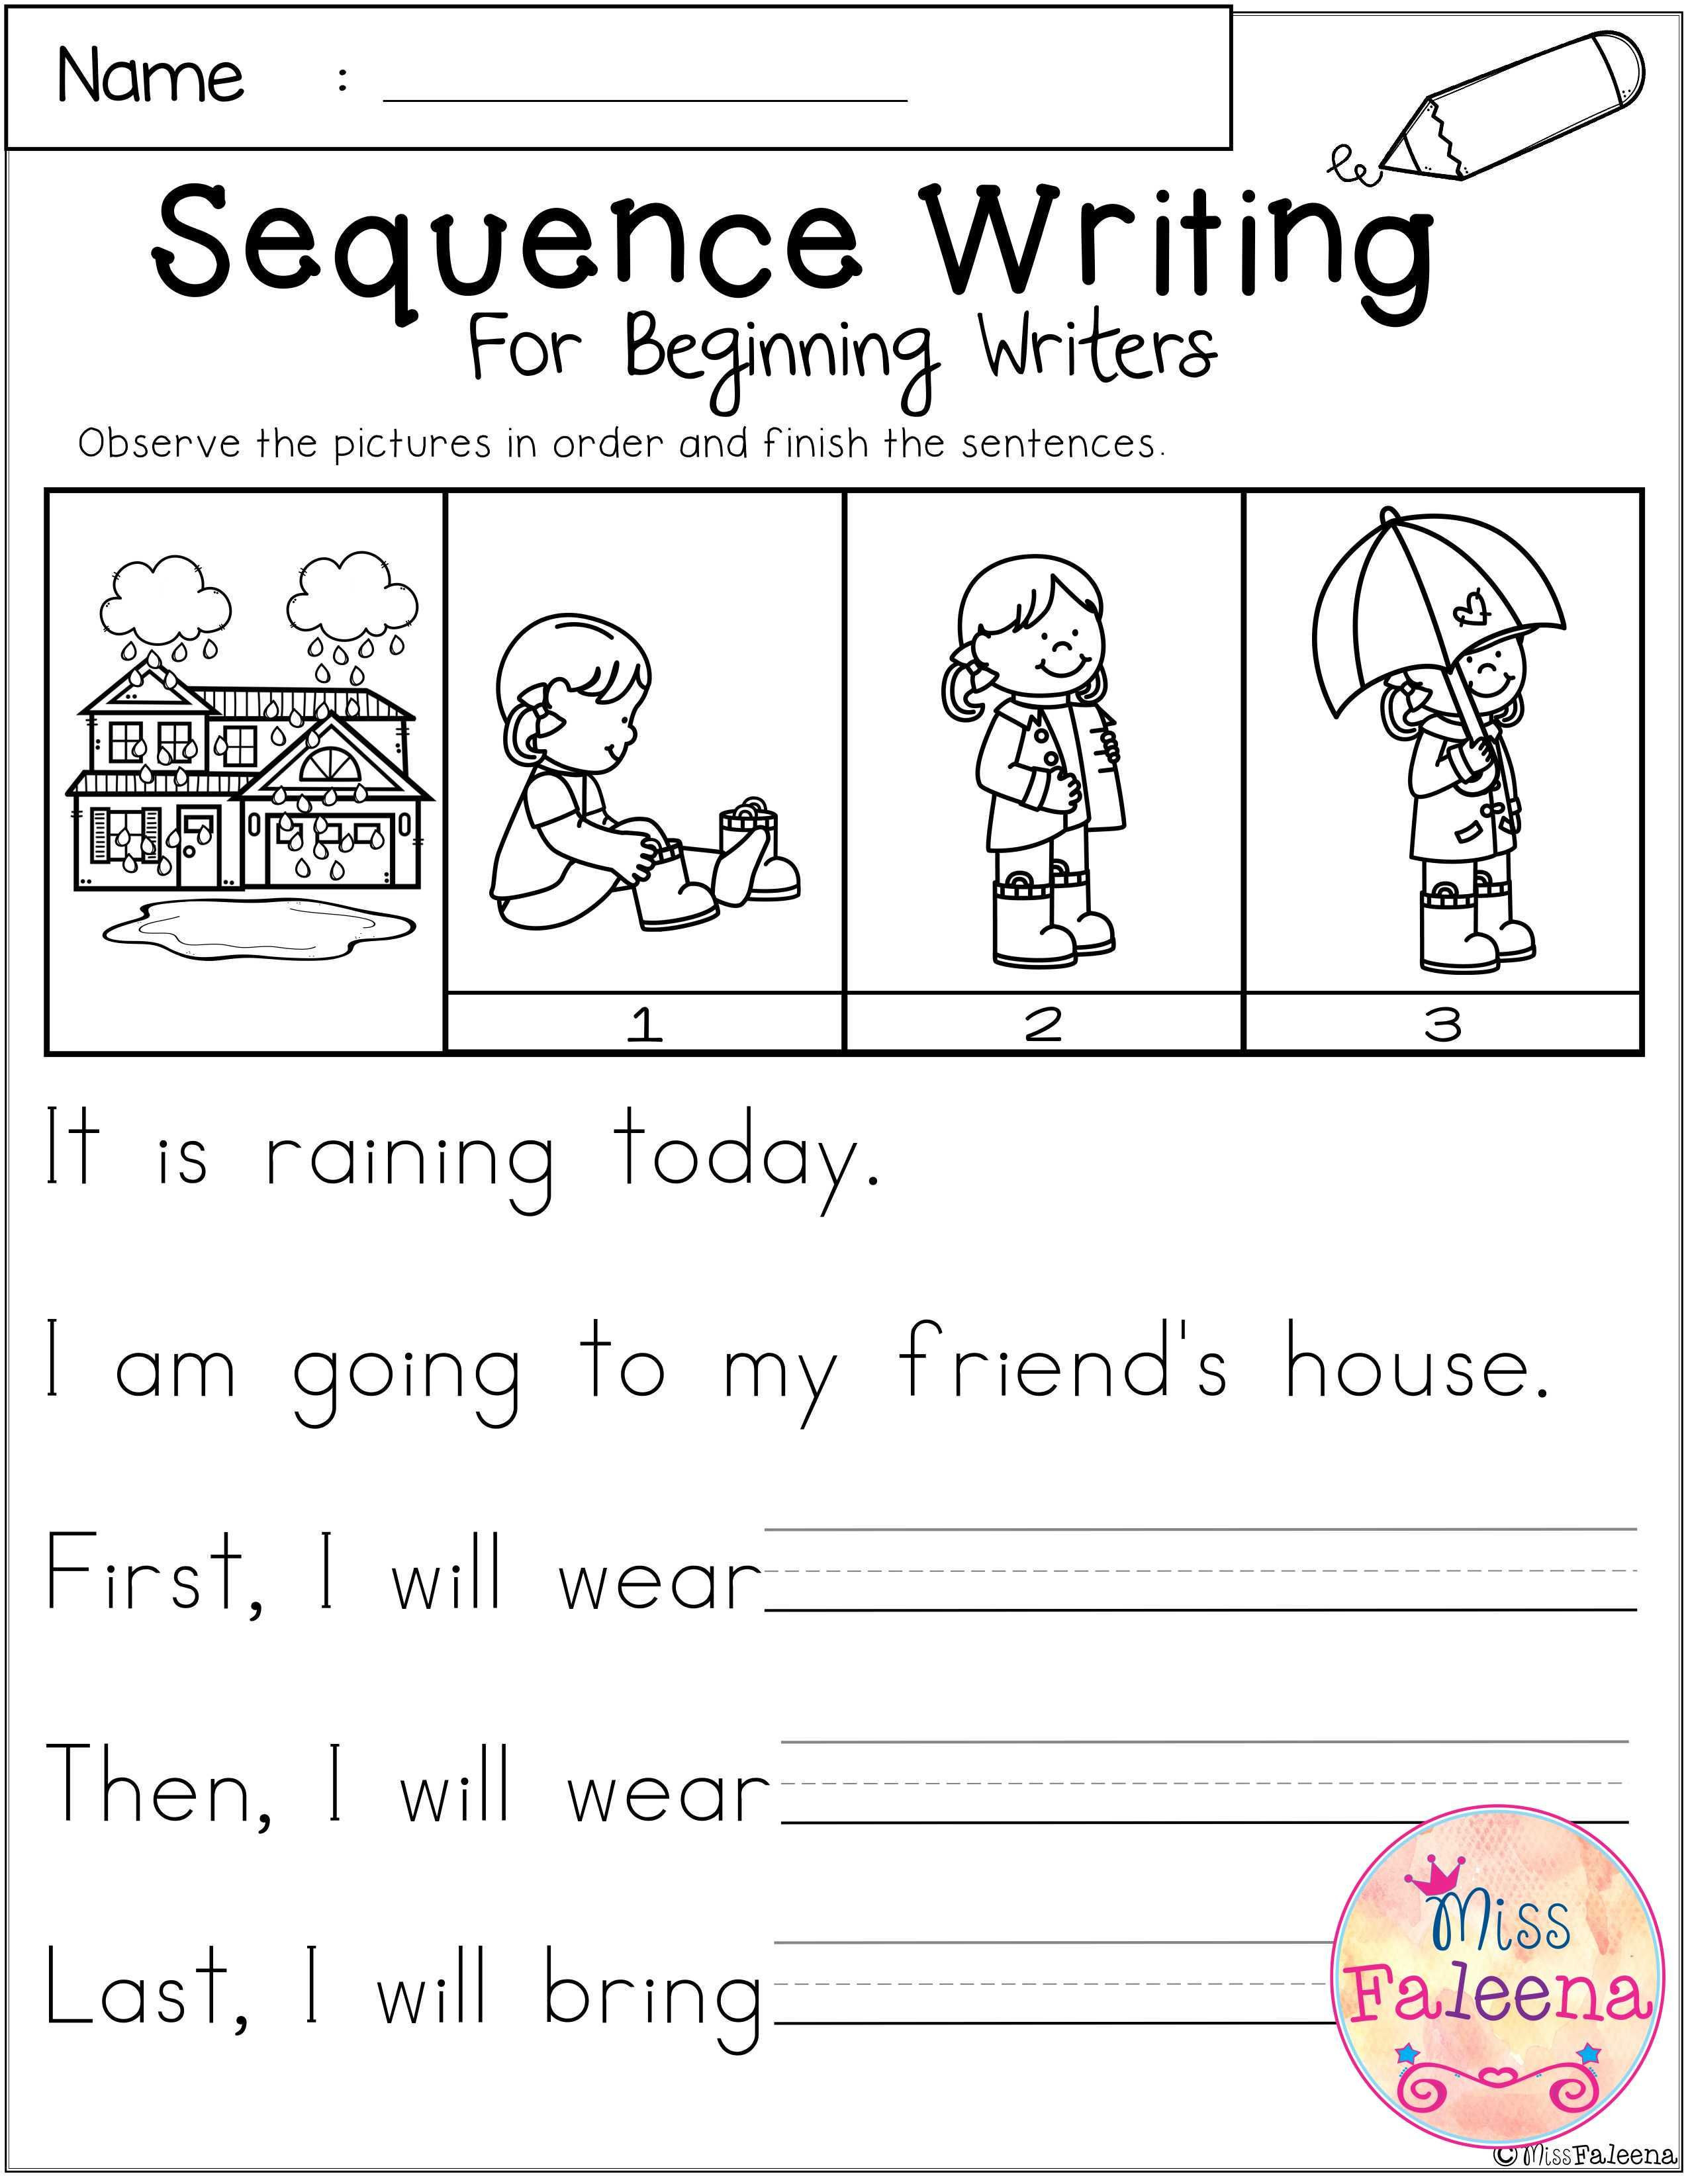 Story Sequencing Worksheets for Kindergarten March Sequence Writing for Beginning Writers